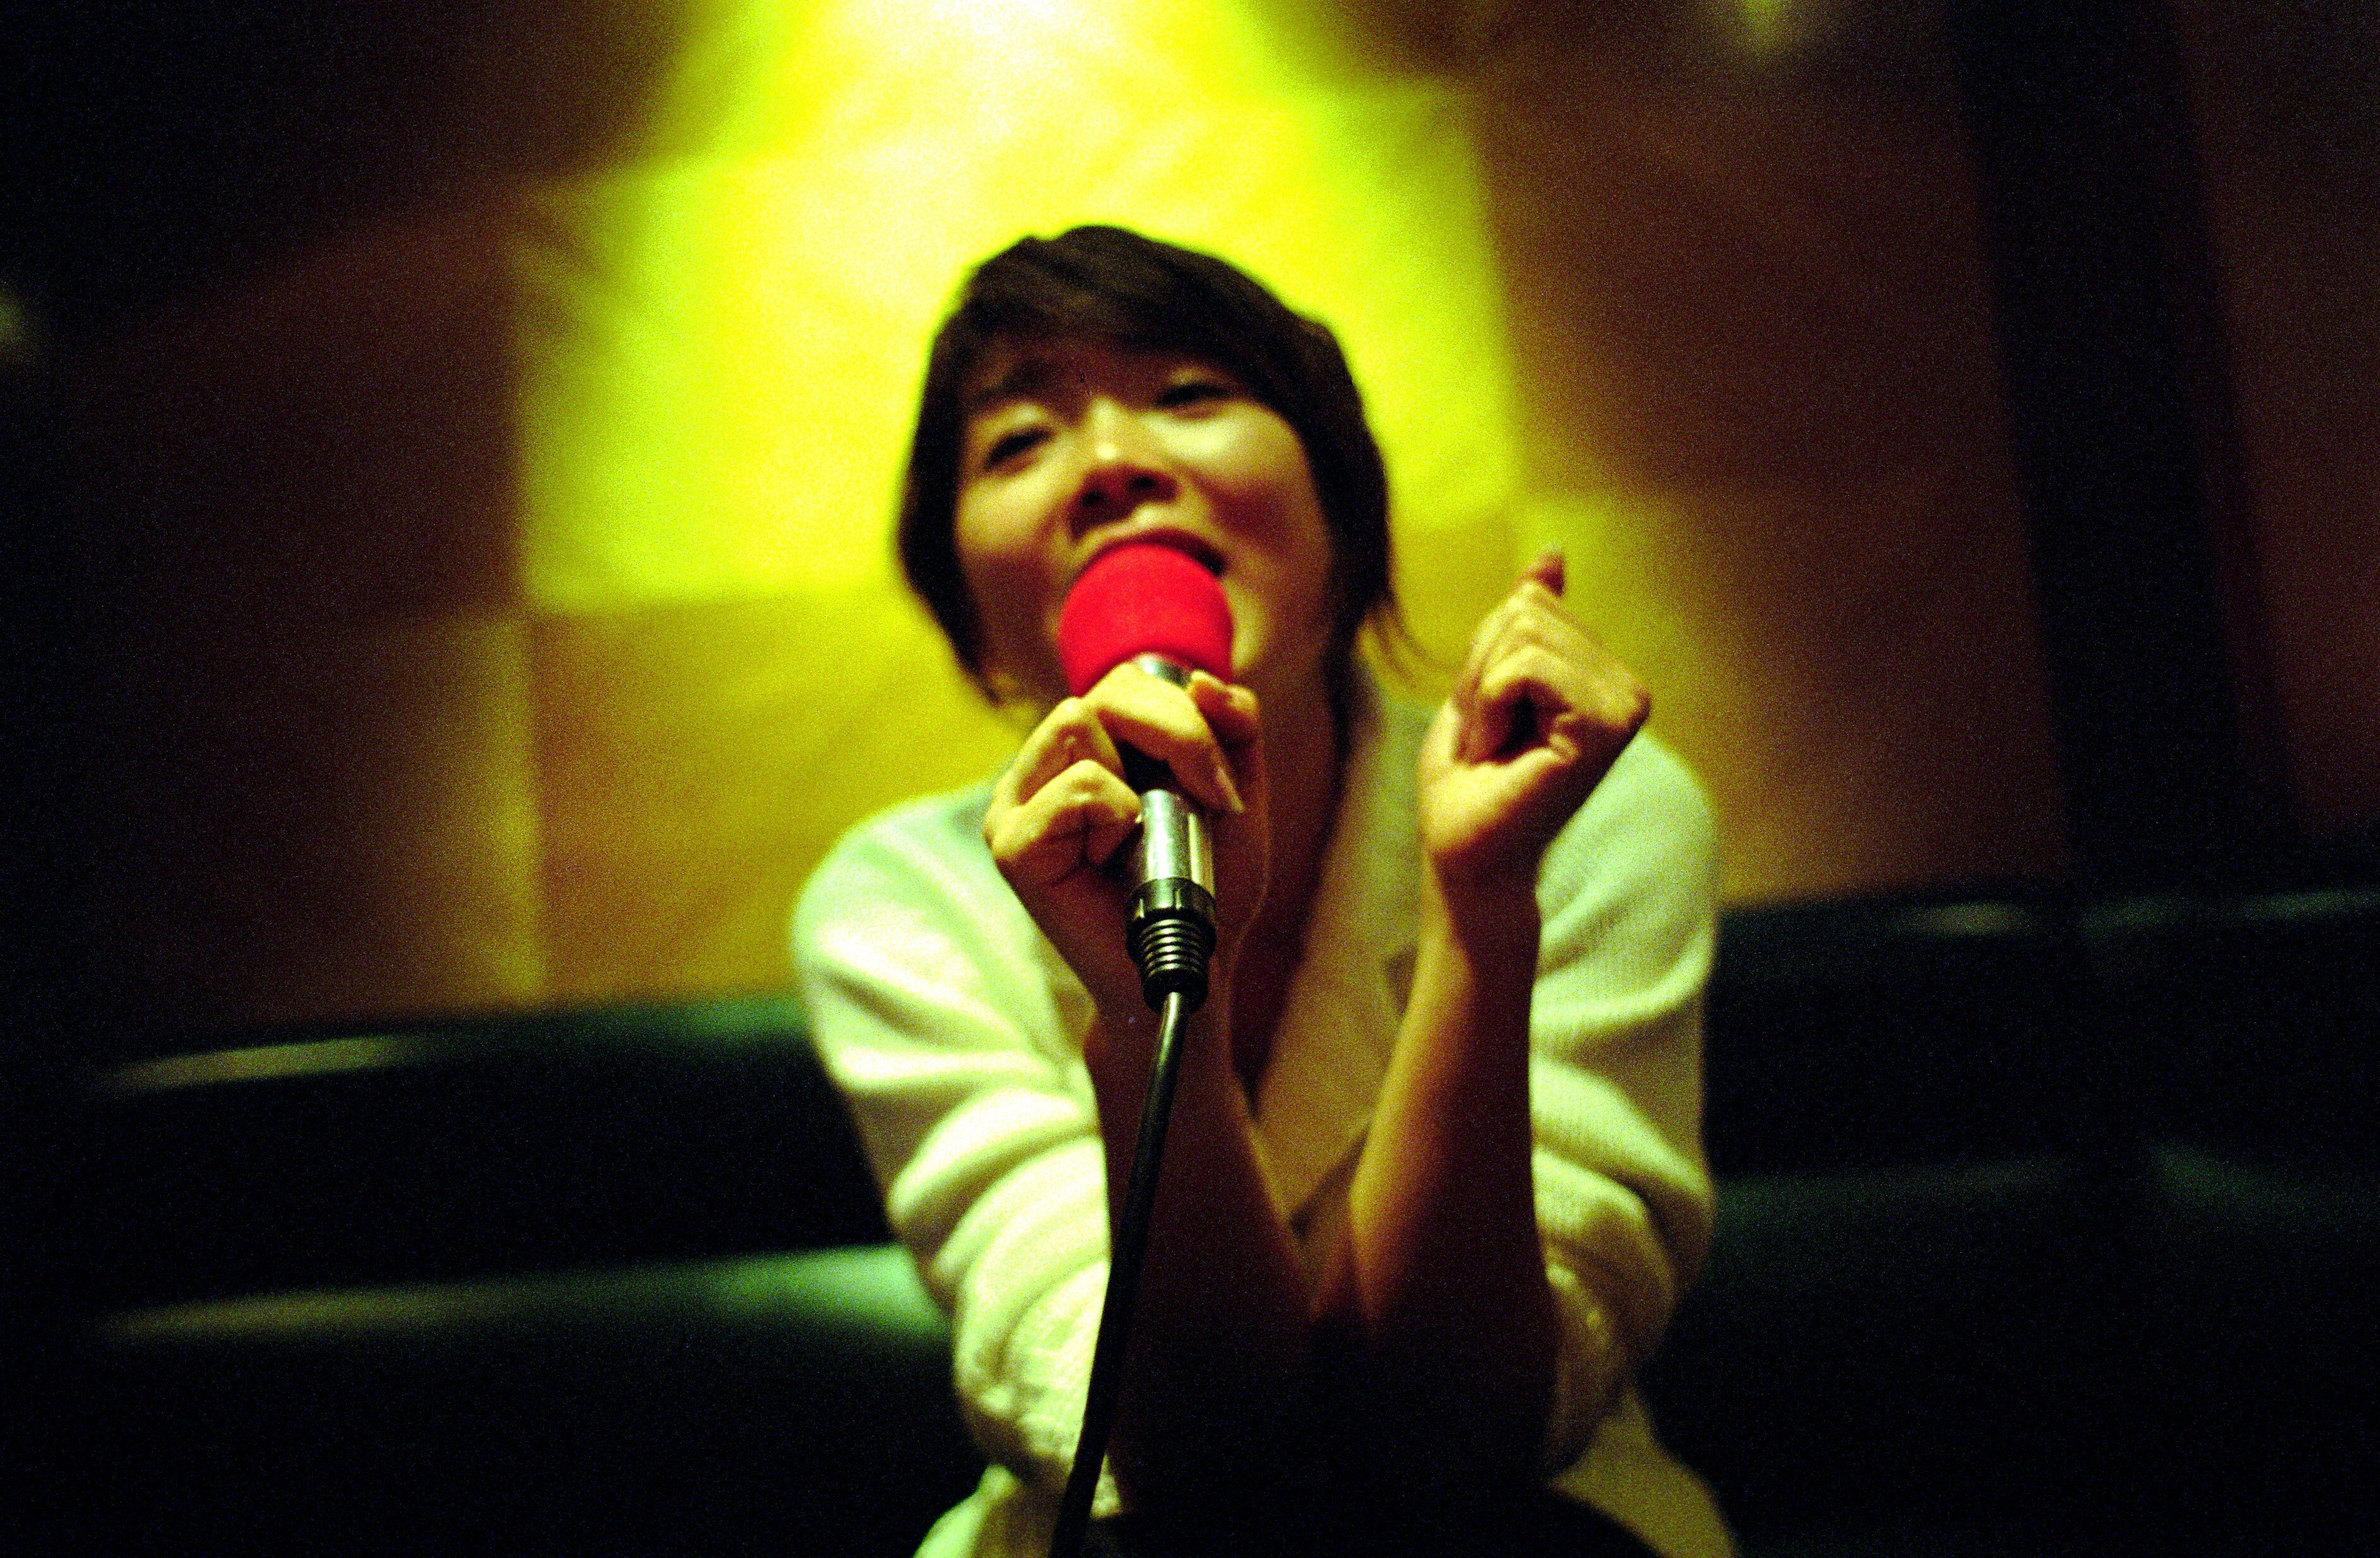 Beijing plans to cancel more karaoke songs as it further tightens its grip over popular media in the country. Photo: Getty